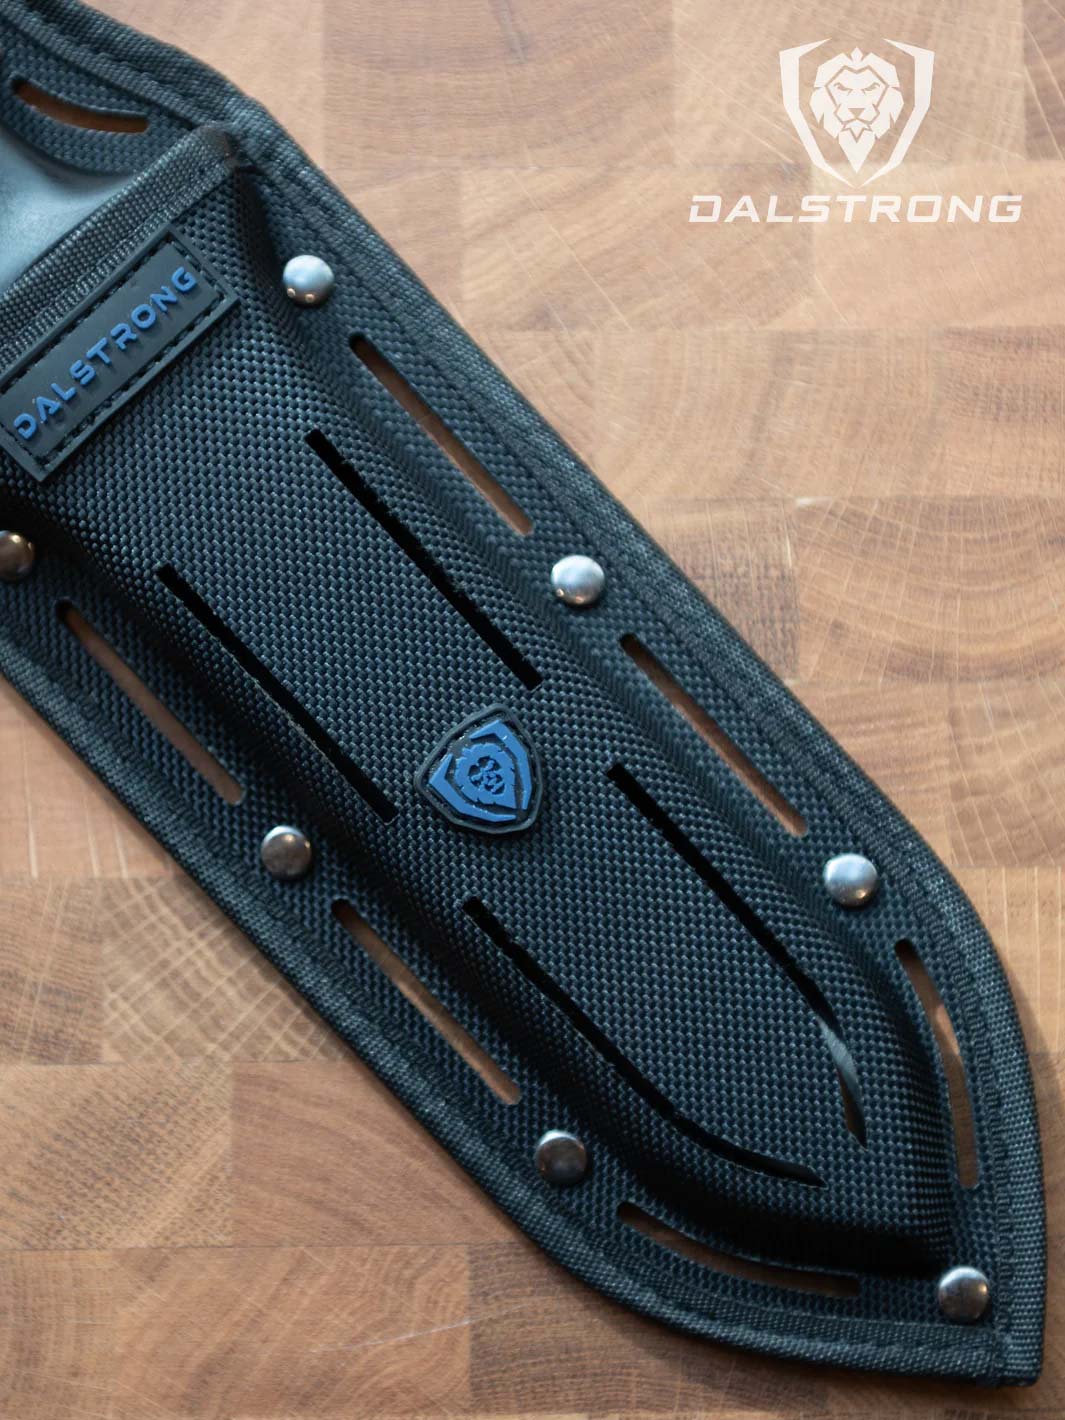 Dalstrong gladiator series 6.5 inch hori hori knife with black handle showcasing its blade sheath.